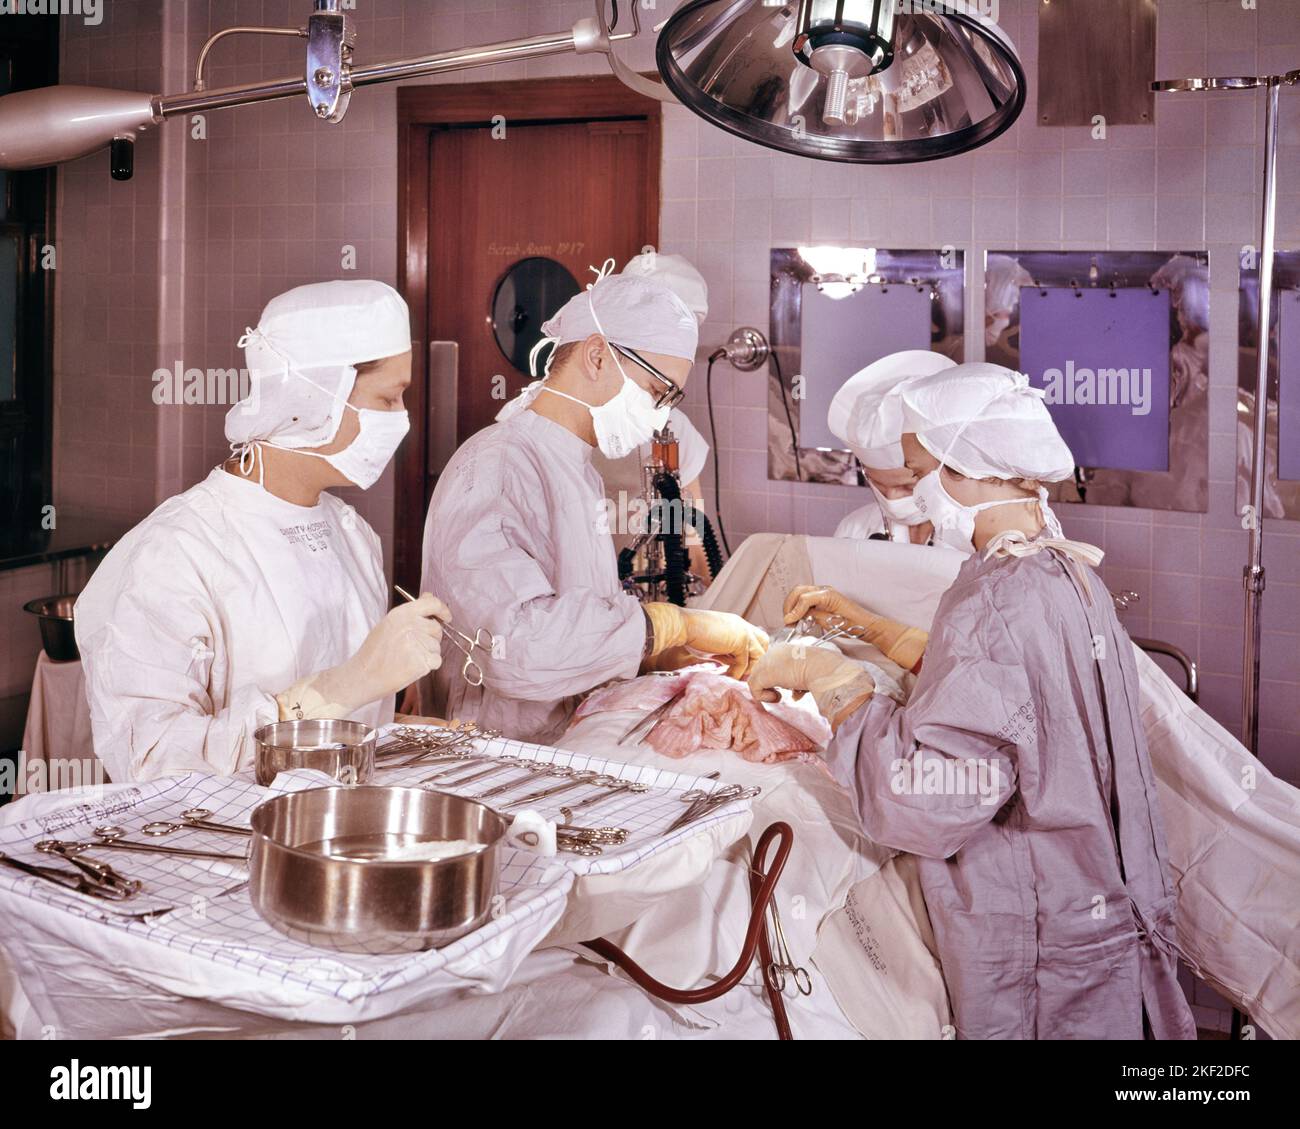 1960s SURGEON AND SUPPORTING STAFF PERFORMING A THORACIC OR ABDOMINAL SURGERY IN A HOSPITAL OPERATING ROOM - km356 GRD001 HARS COPY SPACE HALF-LENGTH LADIES PERSONS CARING MALES PROFESSION CONFIDENCE HEALTHCARE PERFORMING SURGERY SKILL OCCUPATION SKILLS OPERATING PREVENTION PROVIDER HIGH ANGLE PROVIDERS PRACTITIONERS STERILE HEALING AND DIAGNOSIS SURGICAL CAREERS PHYSICIANS HEALTH CARE IMPAIRMENT OCCUPATIONS SURGEON TREATMENT HEALER PHYSICIAN PRACTITIONER OR SUPPORTING ABDOMINAL COOPERATION O.R. OP PRECISION PROFESSIONALS STAFF TOGETHERNESS CAUCASIAN ETHNICITY DISEASE OLD FASHIONED Stock Photo